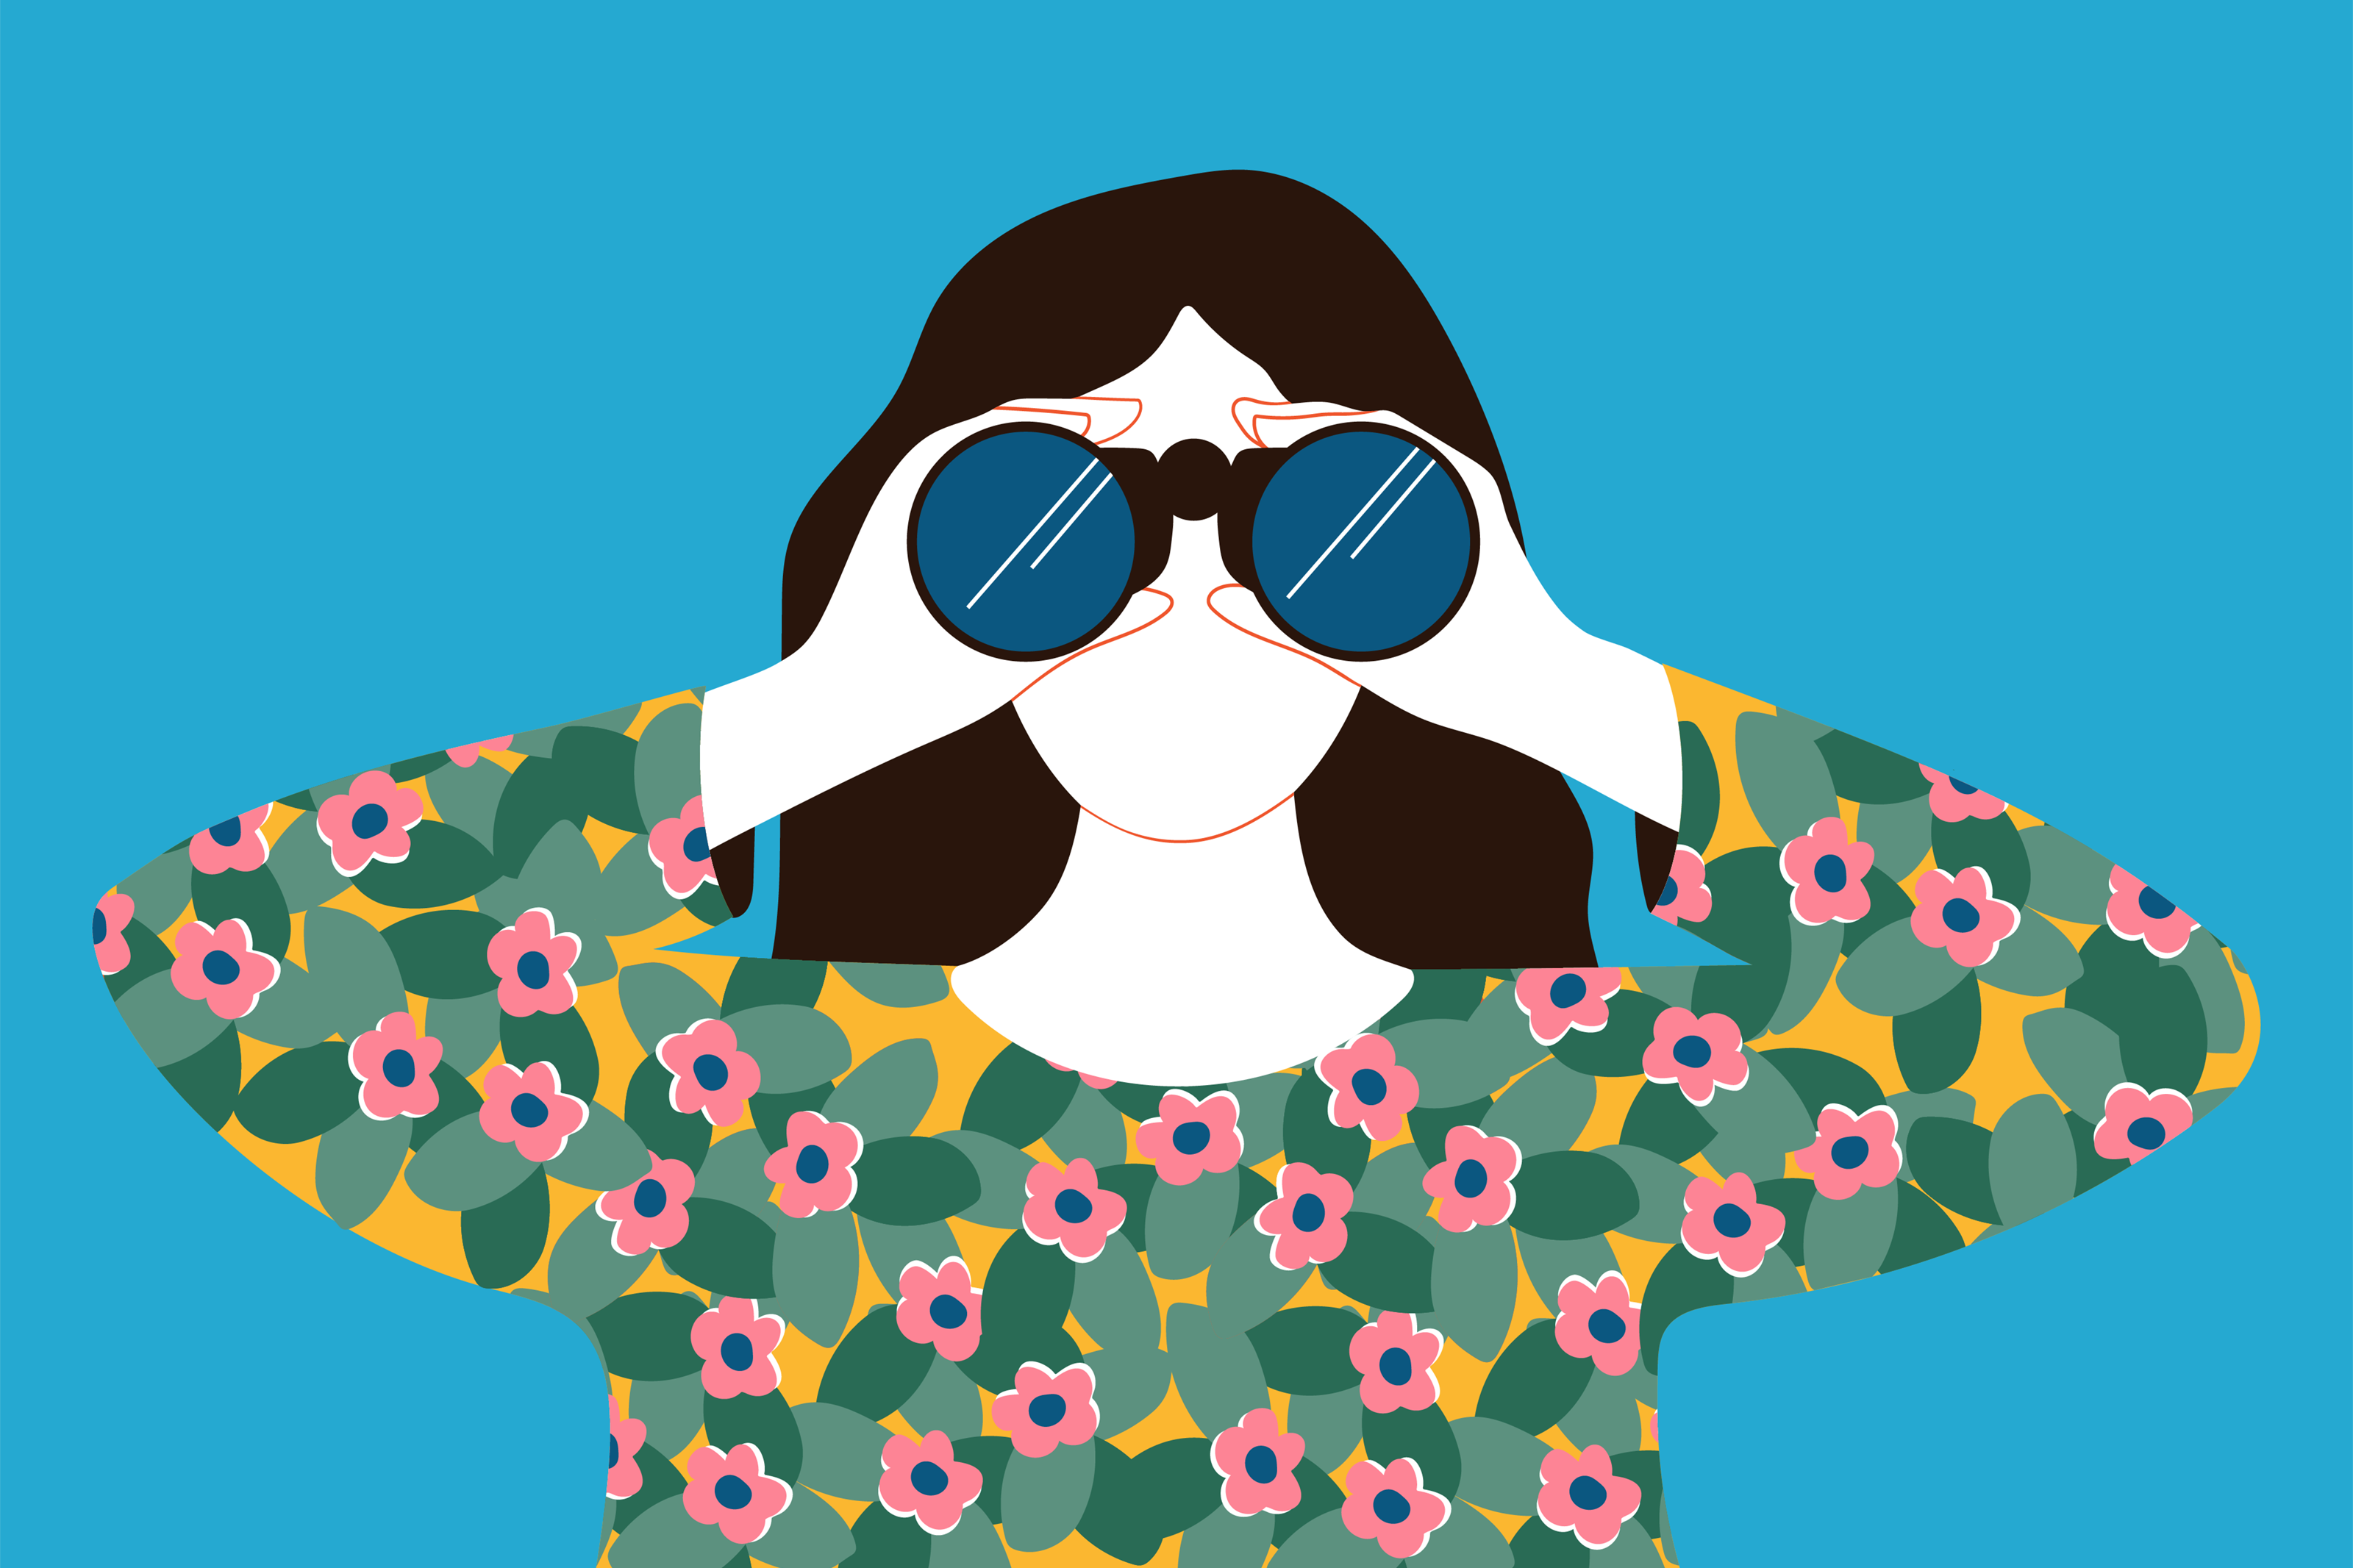 house hunting checklist snoop home you want illustration of a woman with black hair and a colorful floral top holding a pair of binoculars to her eyes